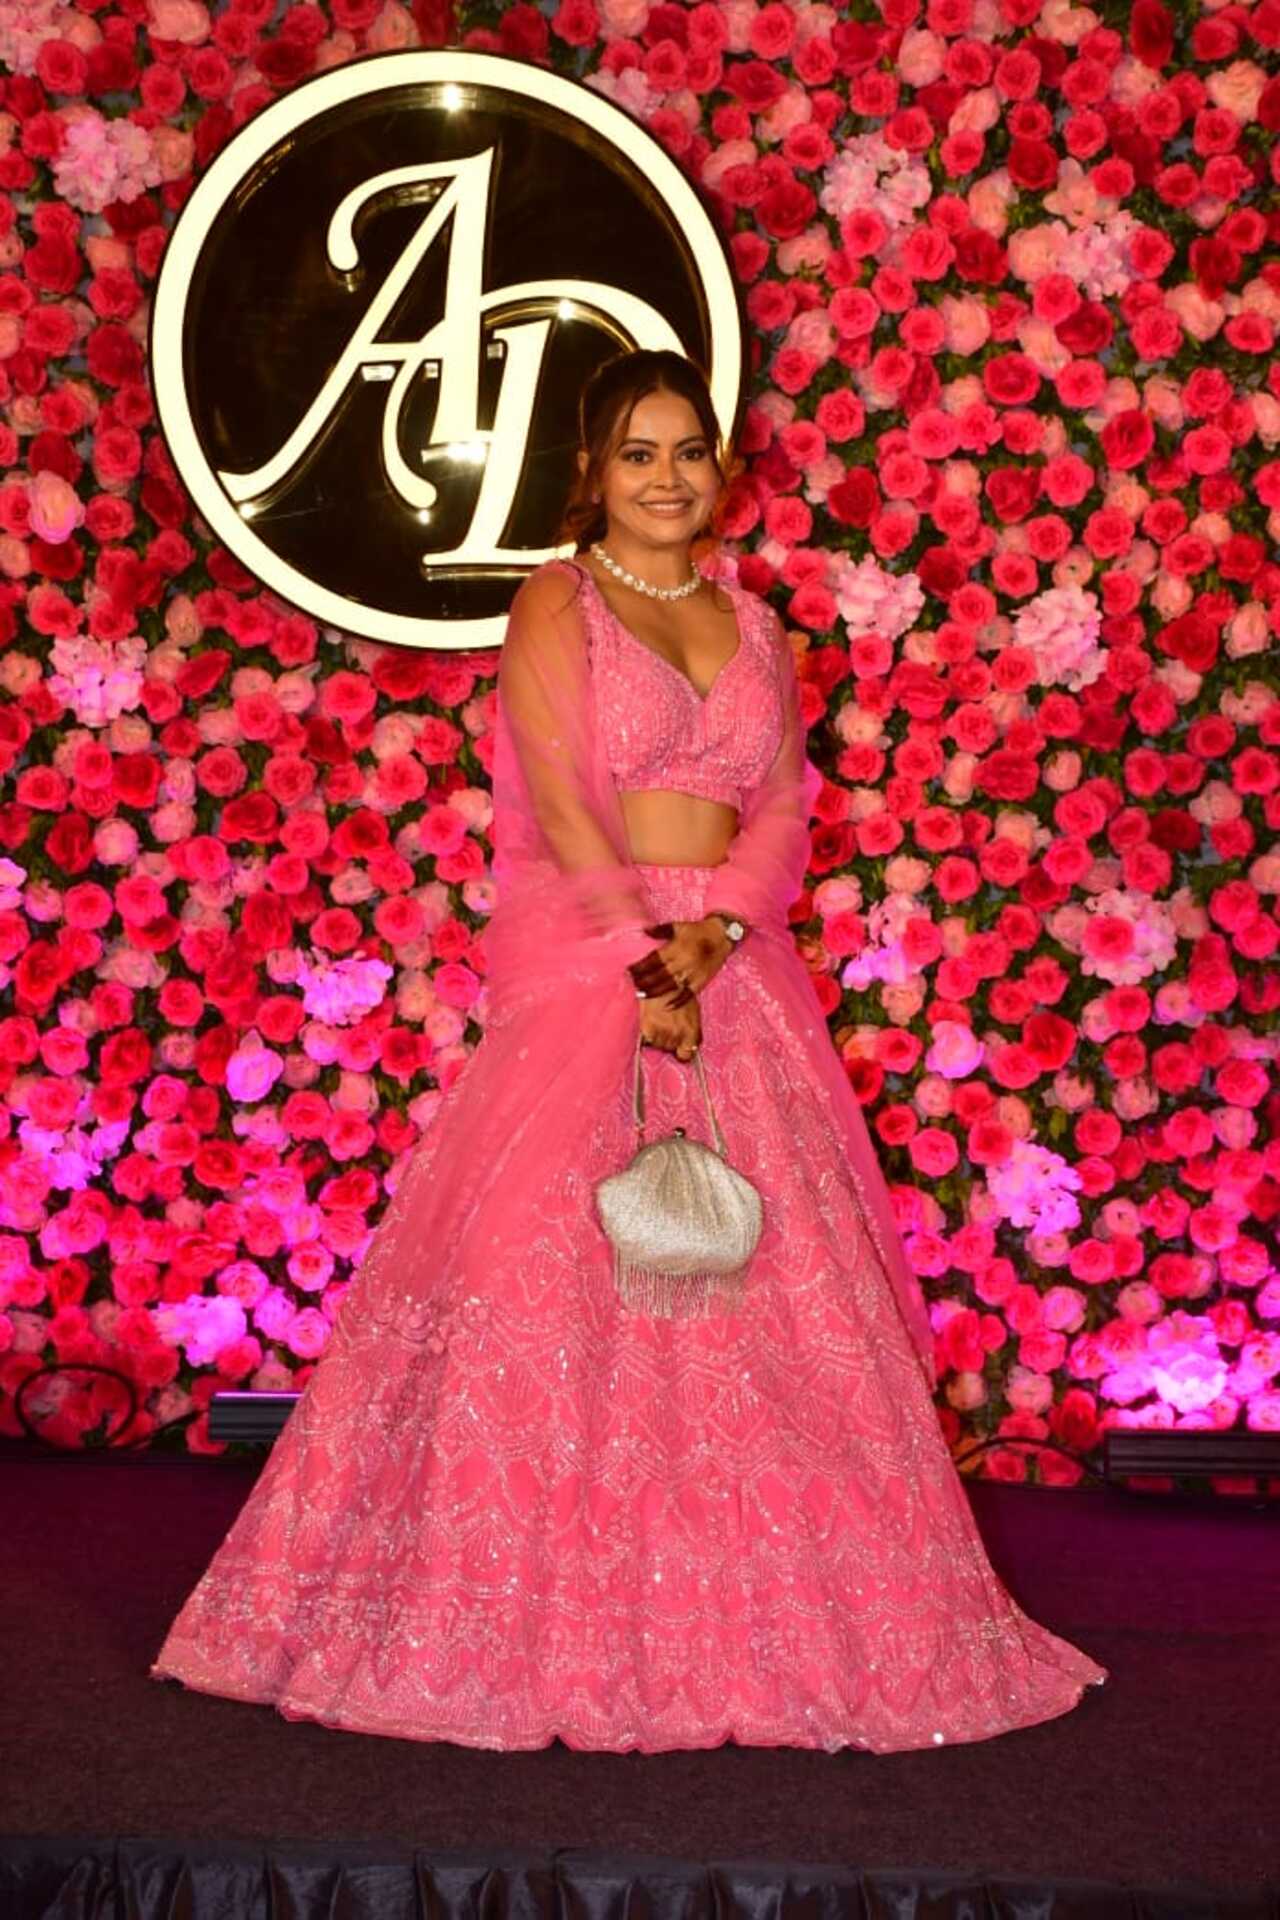 Saath Nibhaana Saathiya fame and 'Bigg Boss' contestant Devoleena Bhattacharjee attended the event in a blush pink lehenga. 